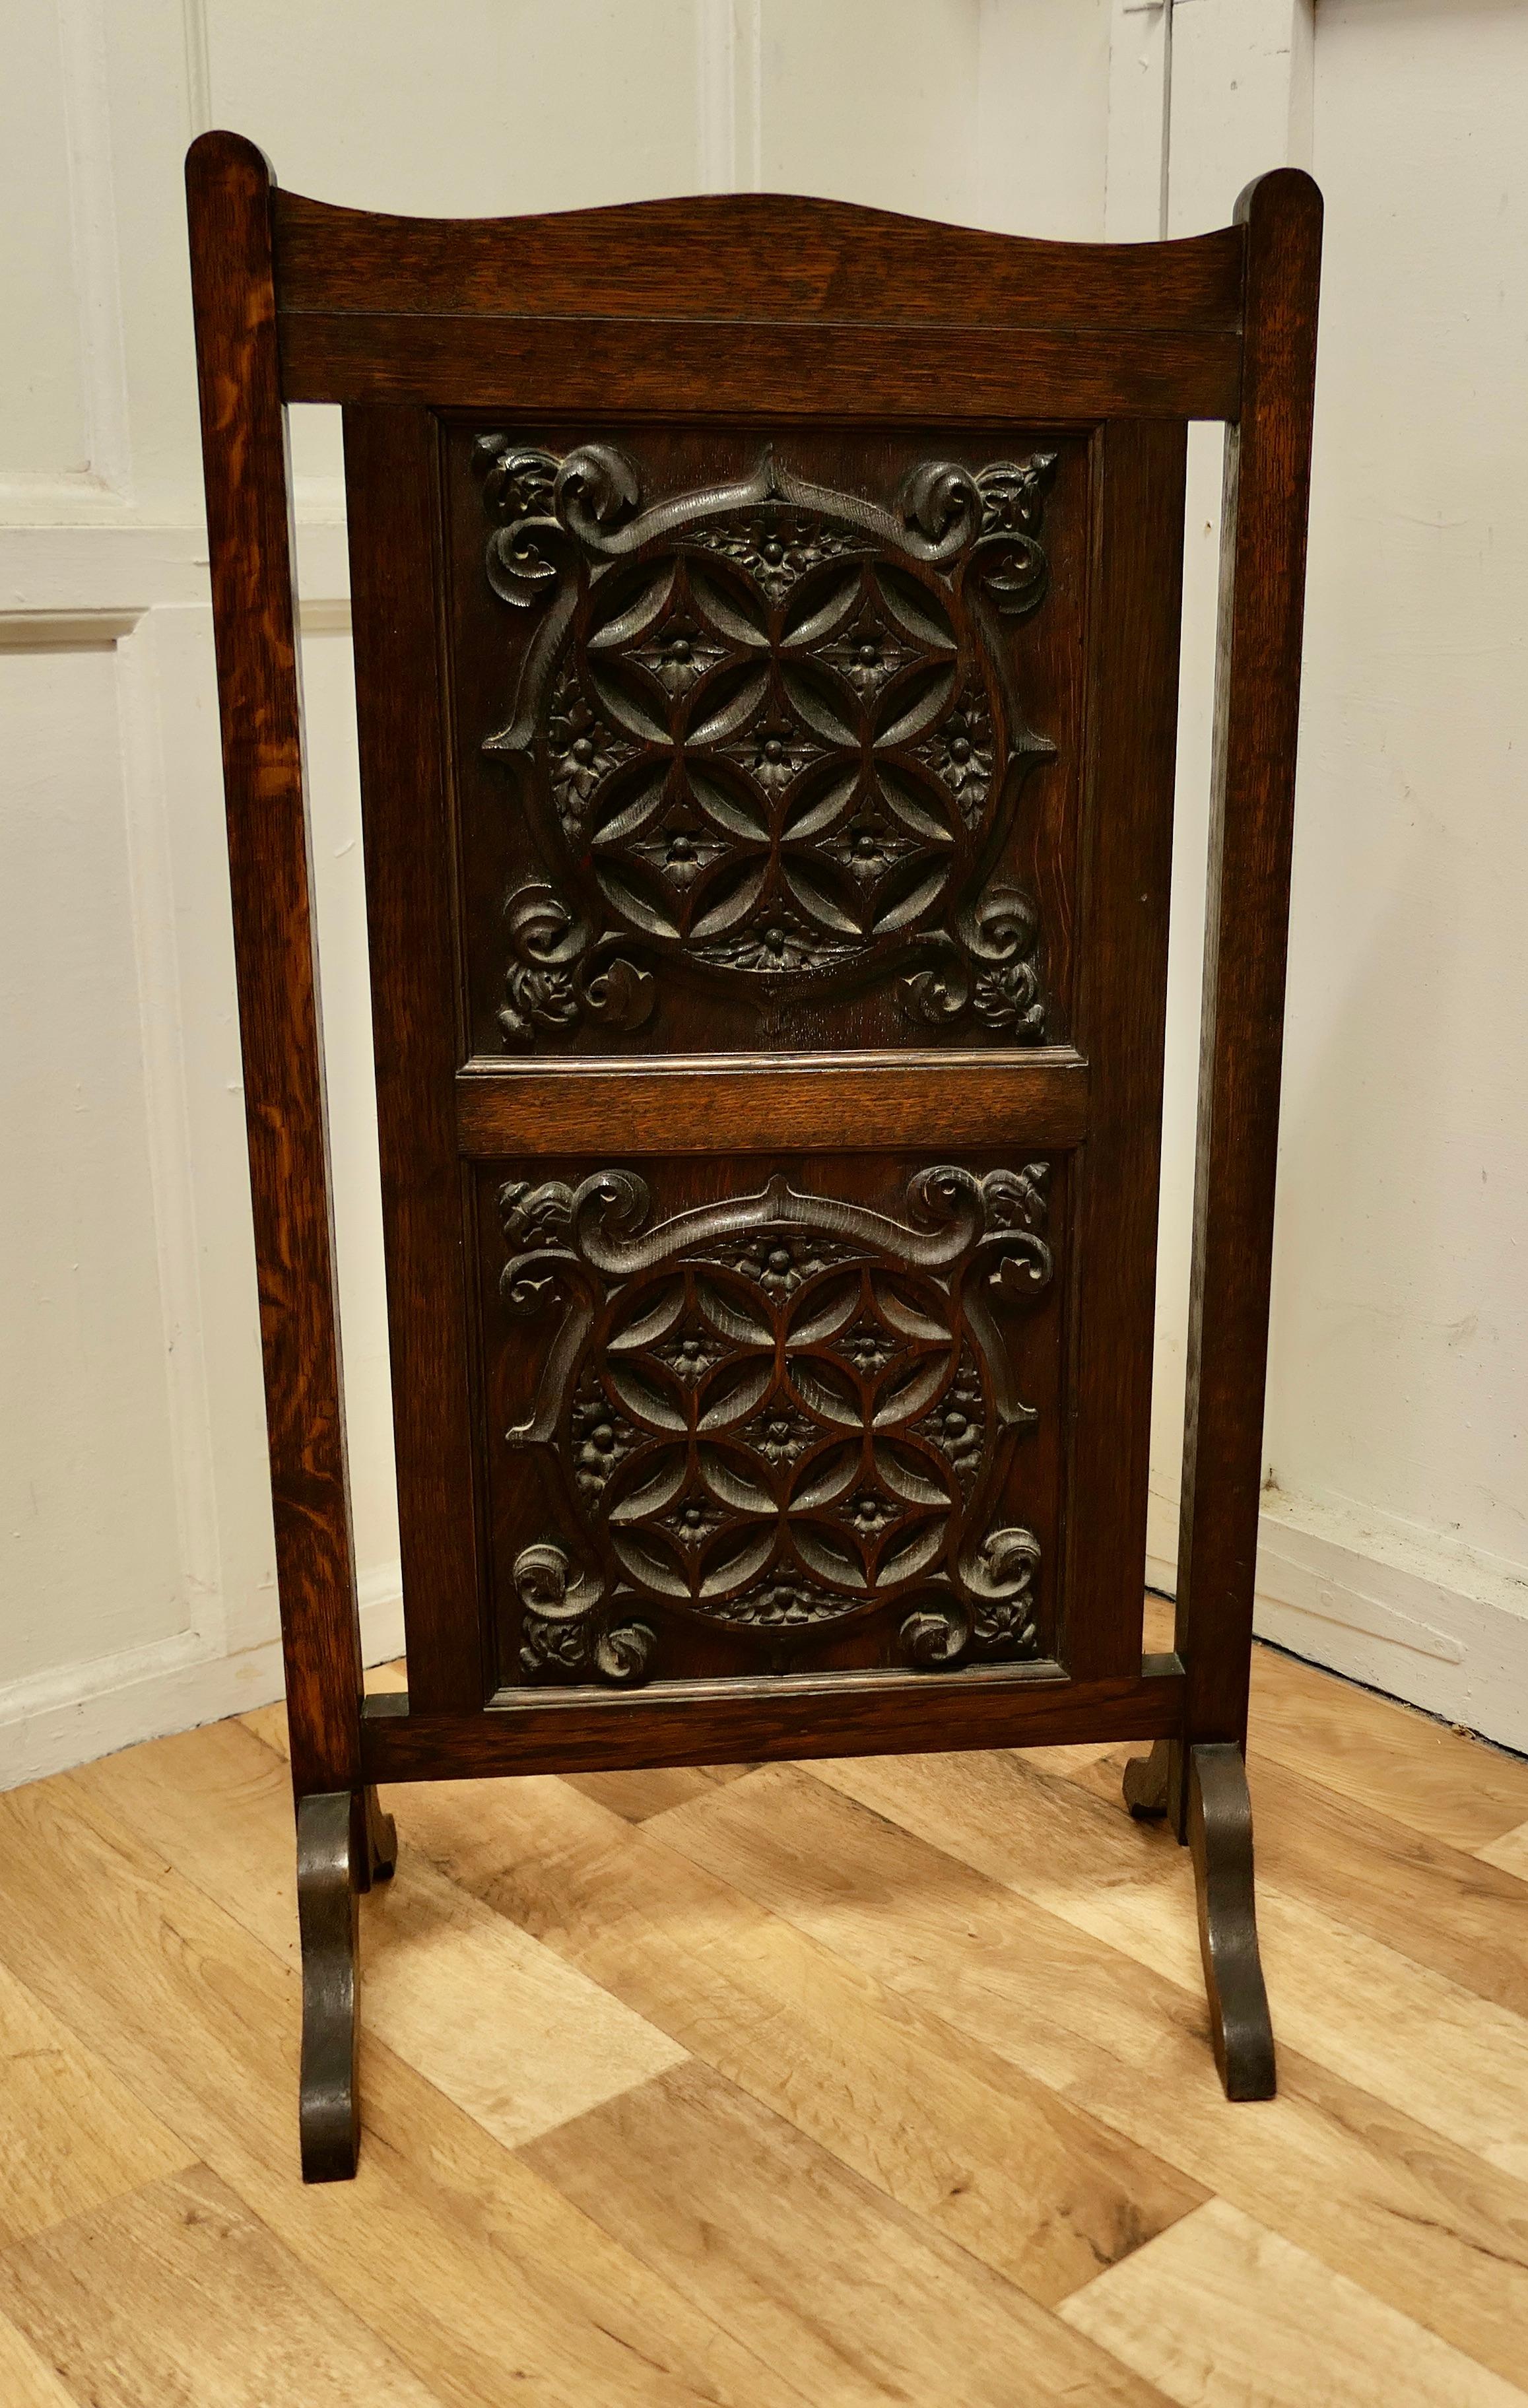 Carved Gothic oak panelled fire screen.

This sturdy screen has 2 heavy carved panels set in an oak frame.
The screen is in good condition with a nice patina.
The screen is 36” high and 20” wide.
THM217.